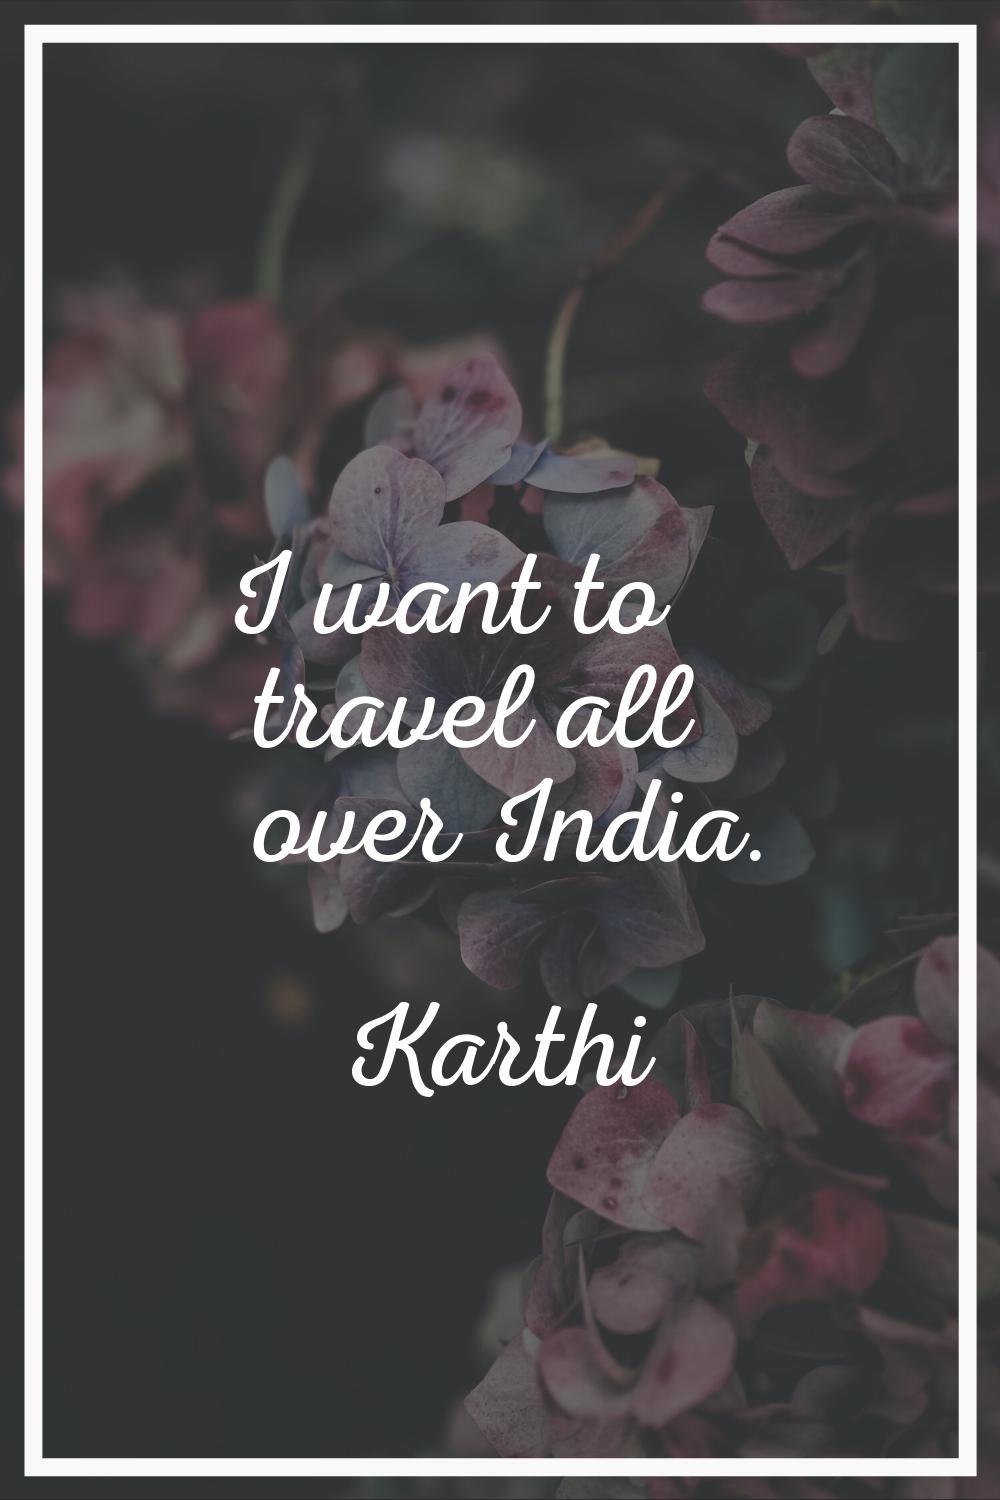 I want to travel all over India.